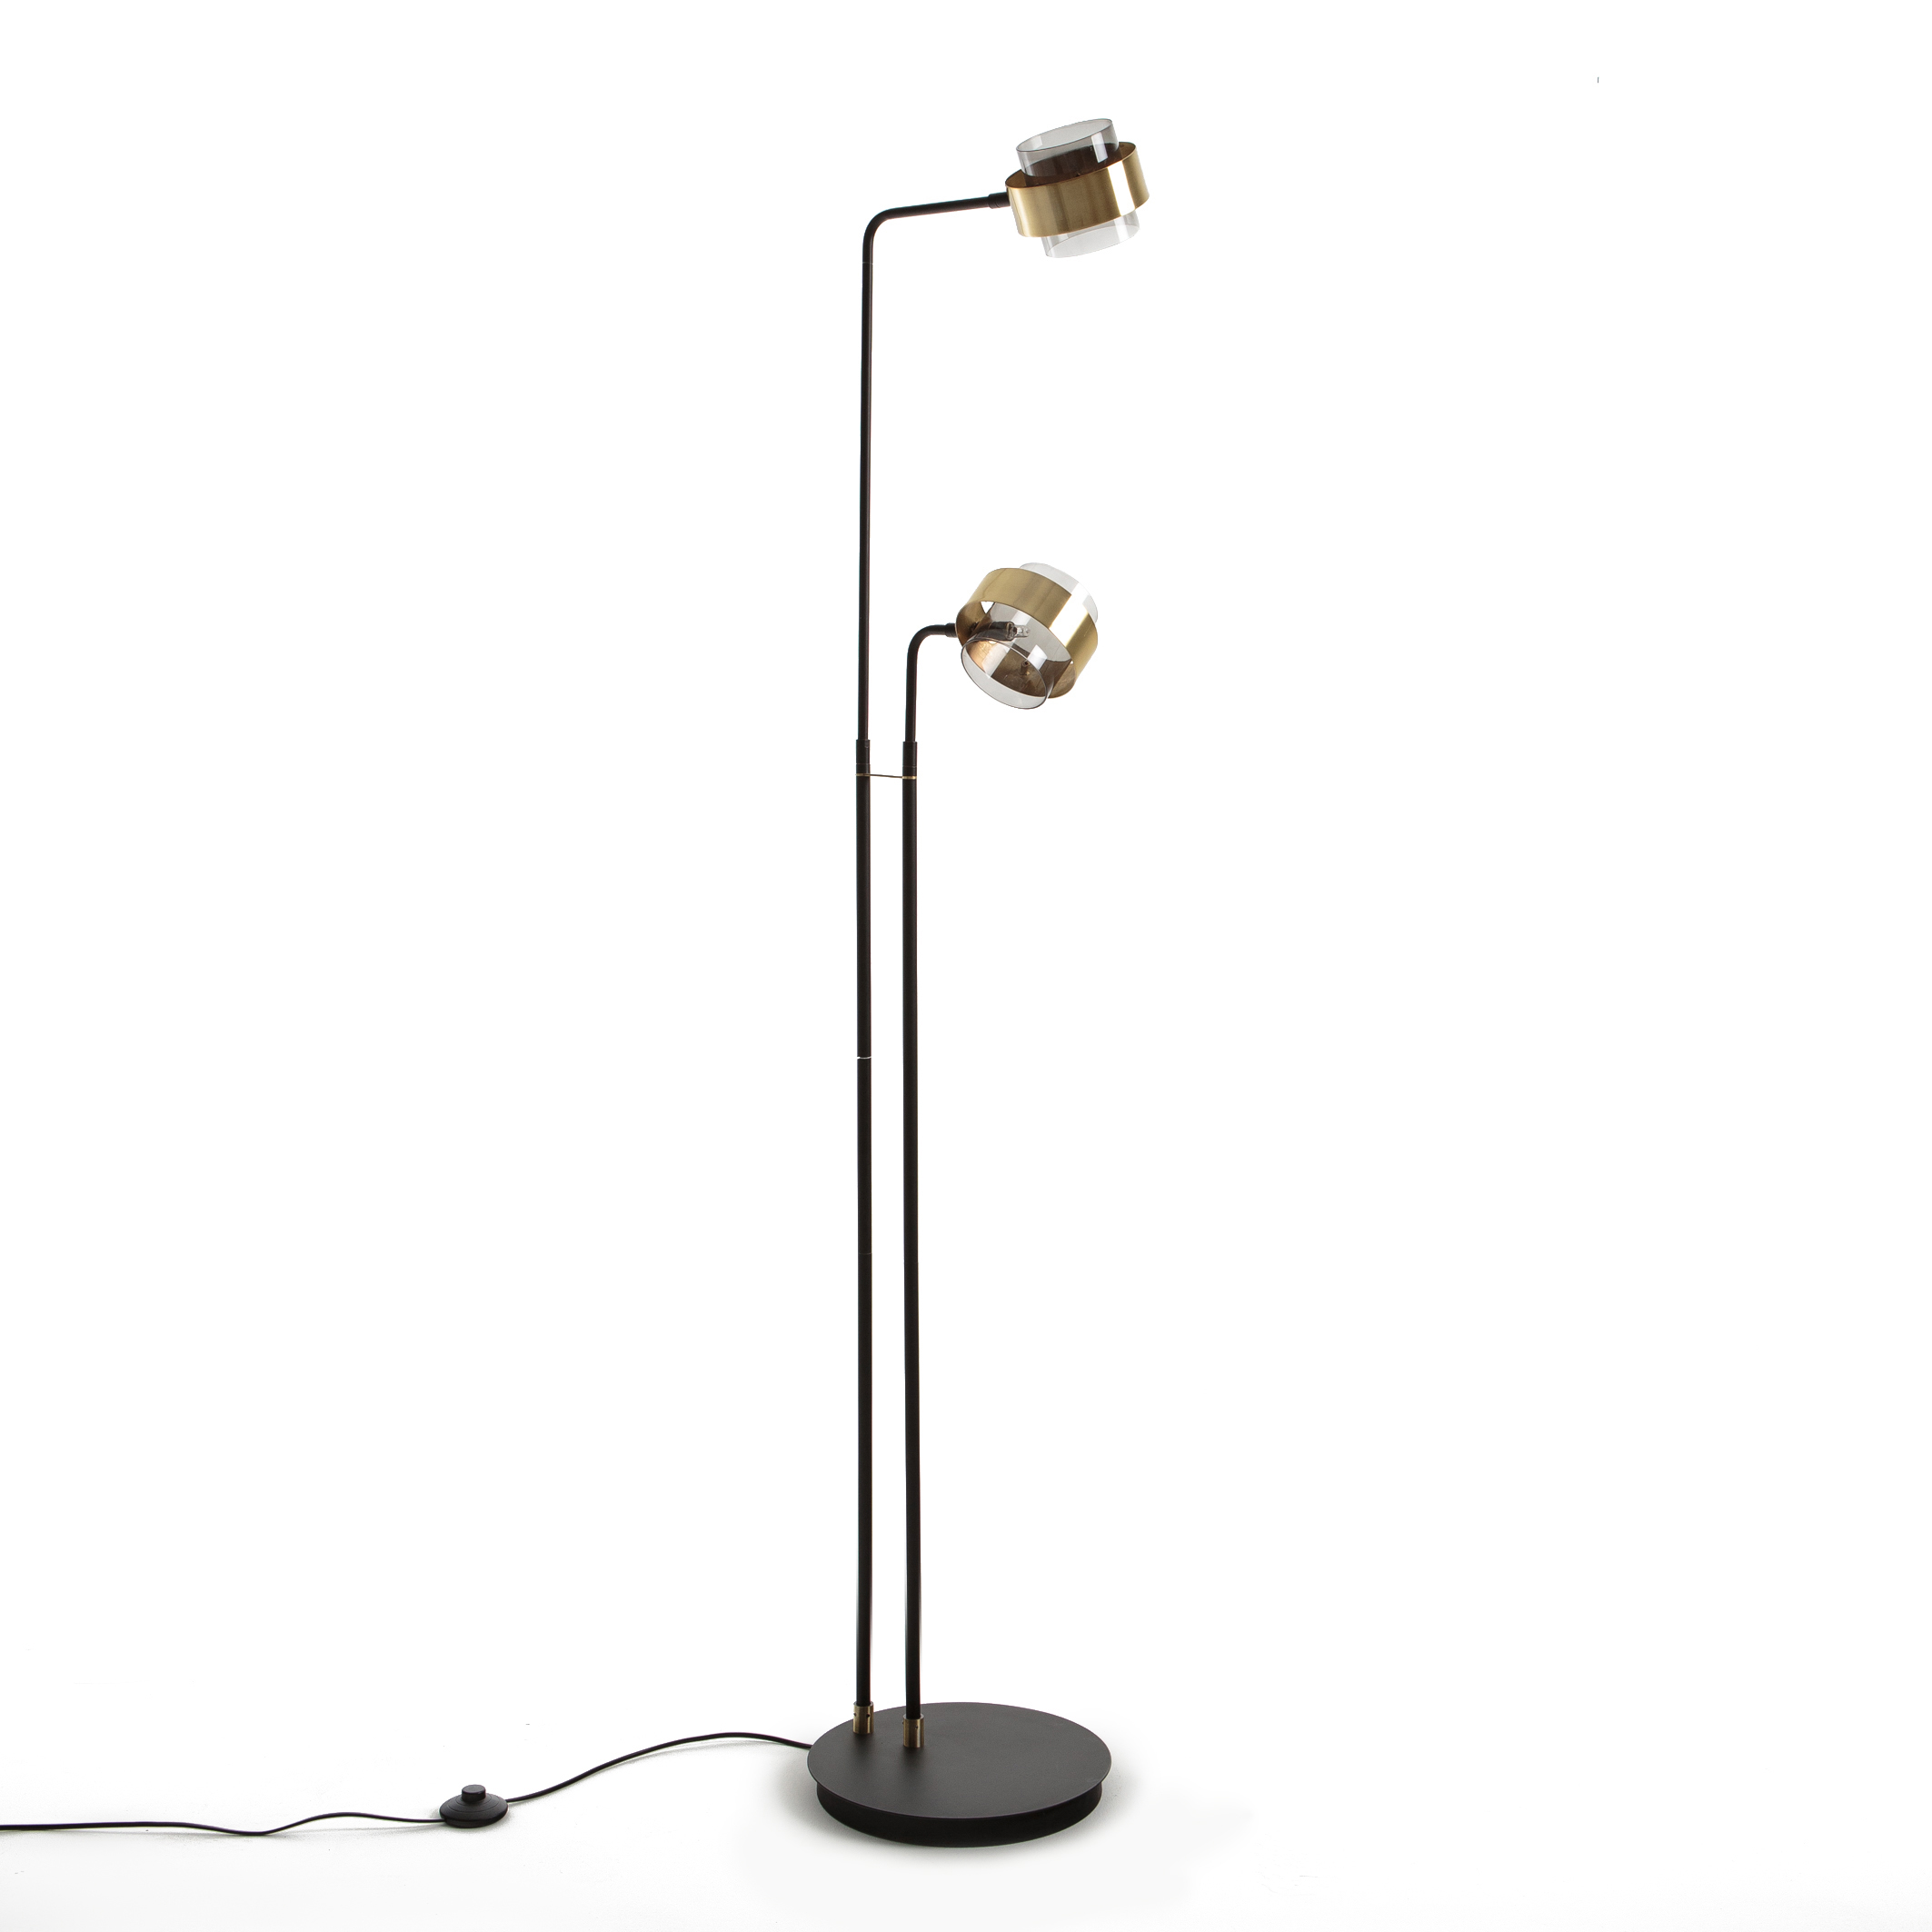 Botello metal & glass Redoute adjustable La lamp reading black/brass Redoute La arms with | Interieurs floor